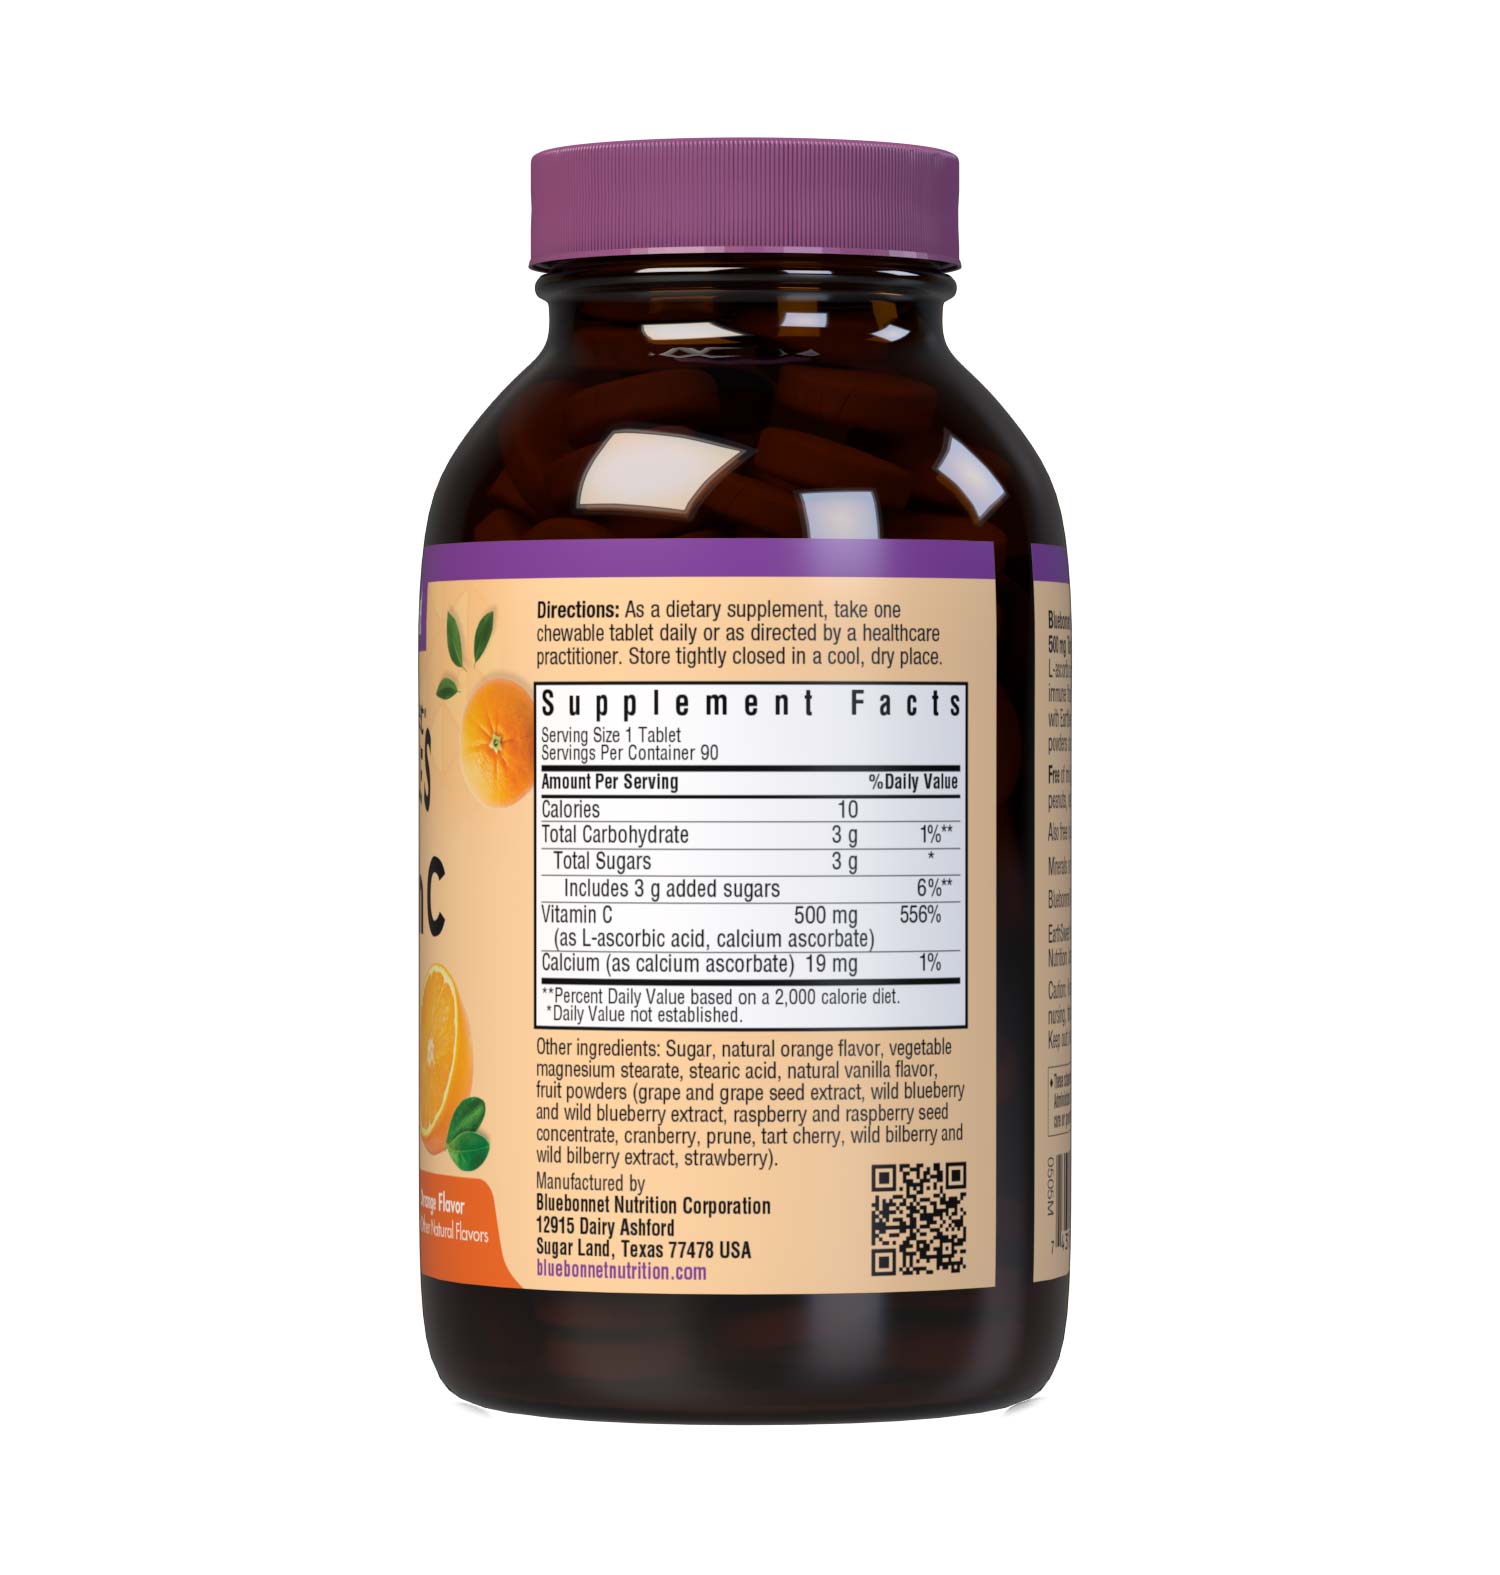 Bluebonnet’s EarthSweet Chewables Vitamin C 500 mg 90 Tablets are formulated with vitamin C from L-ascorbic acid and calcium ascorbate to help support immune function in a delicious orange flavor. Sweetened with EarthSweet, a proprietary sweetening mix of juice powders and sugar cane crystals. Supplement facts panel. #size_90 count